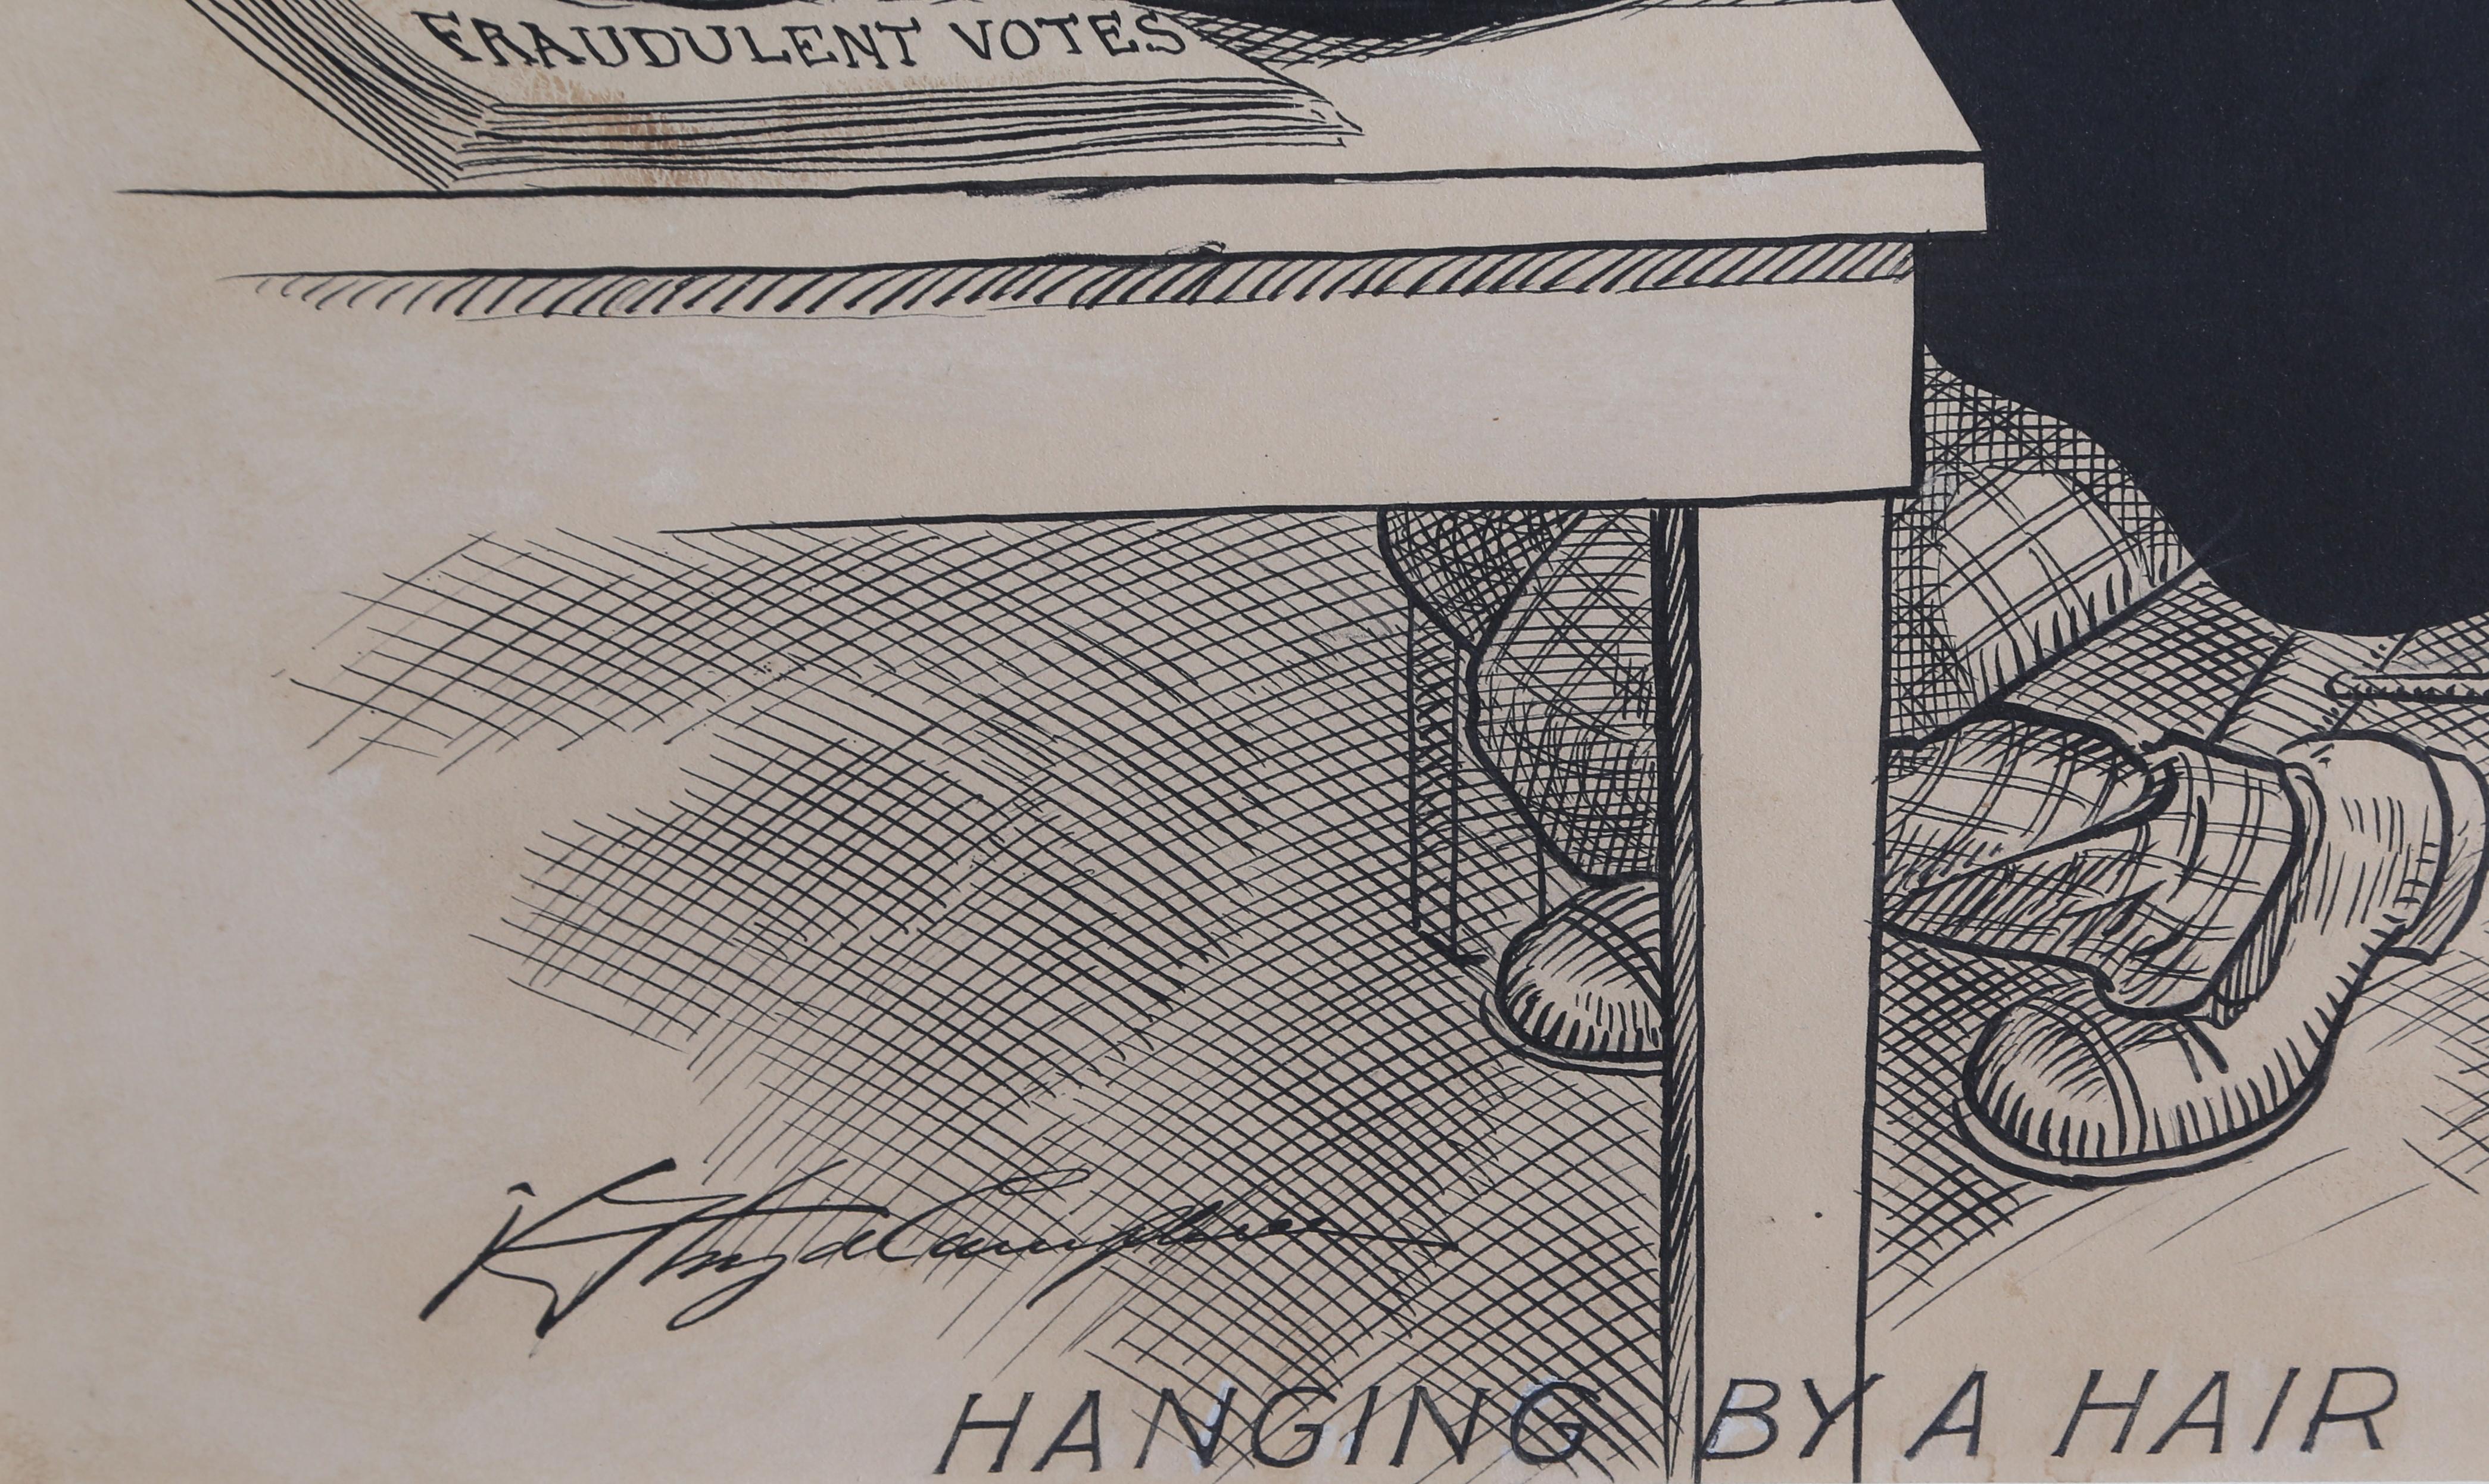 A political satire illustration “Hanging by a Hair” originally published in the The Philadelphia North American newspaper circa 1902, edited by Edwin A Van Valkenburg and pubilshed by Thomas Wanamaker. India ink on paper, signed illegibly lower